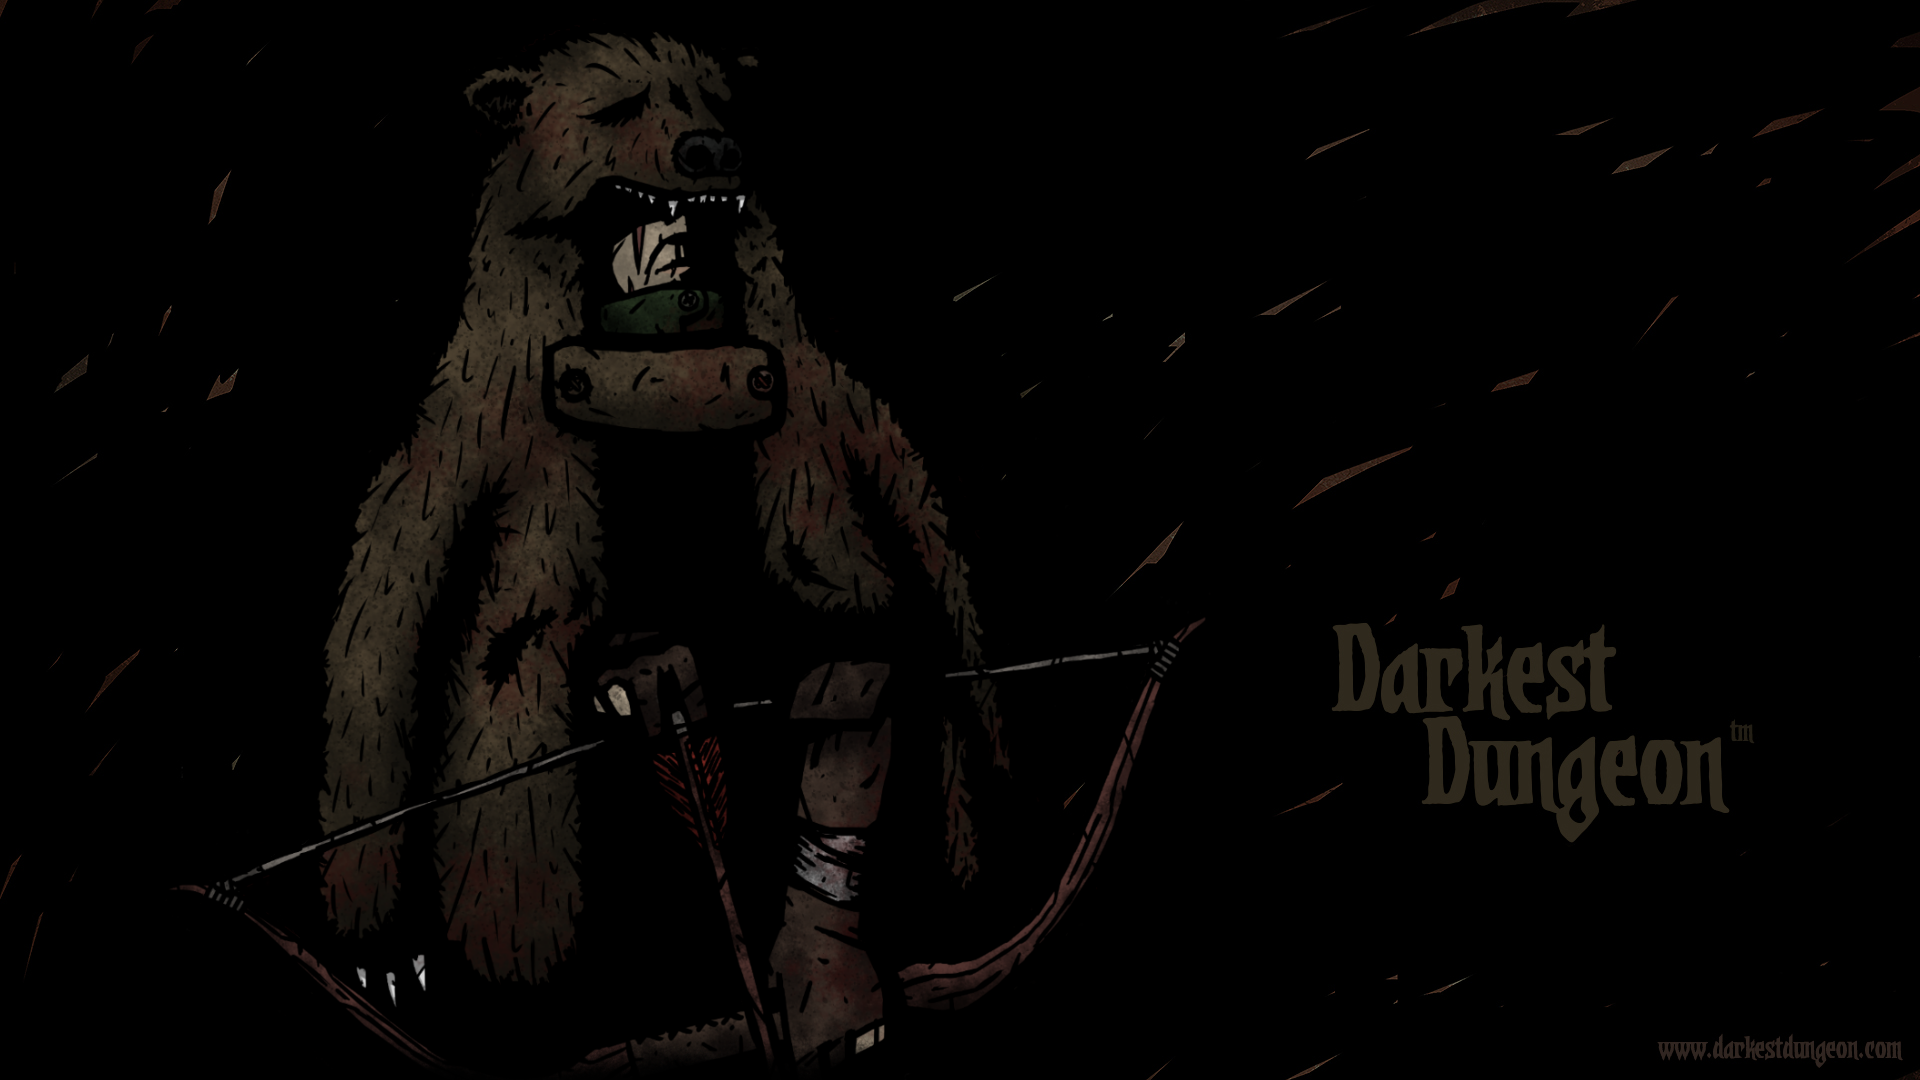 and can be seen in his thread here http www darkestdungeon com topic 1920x1080